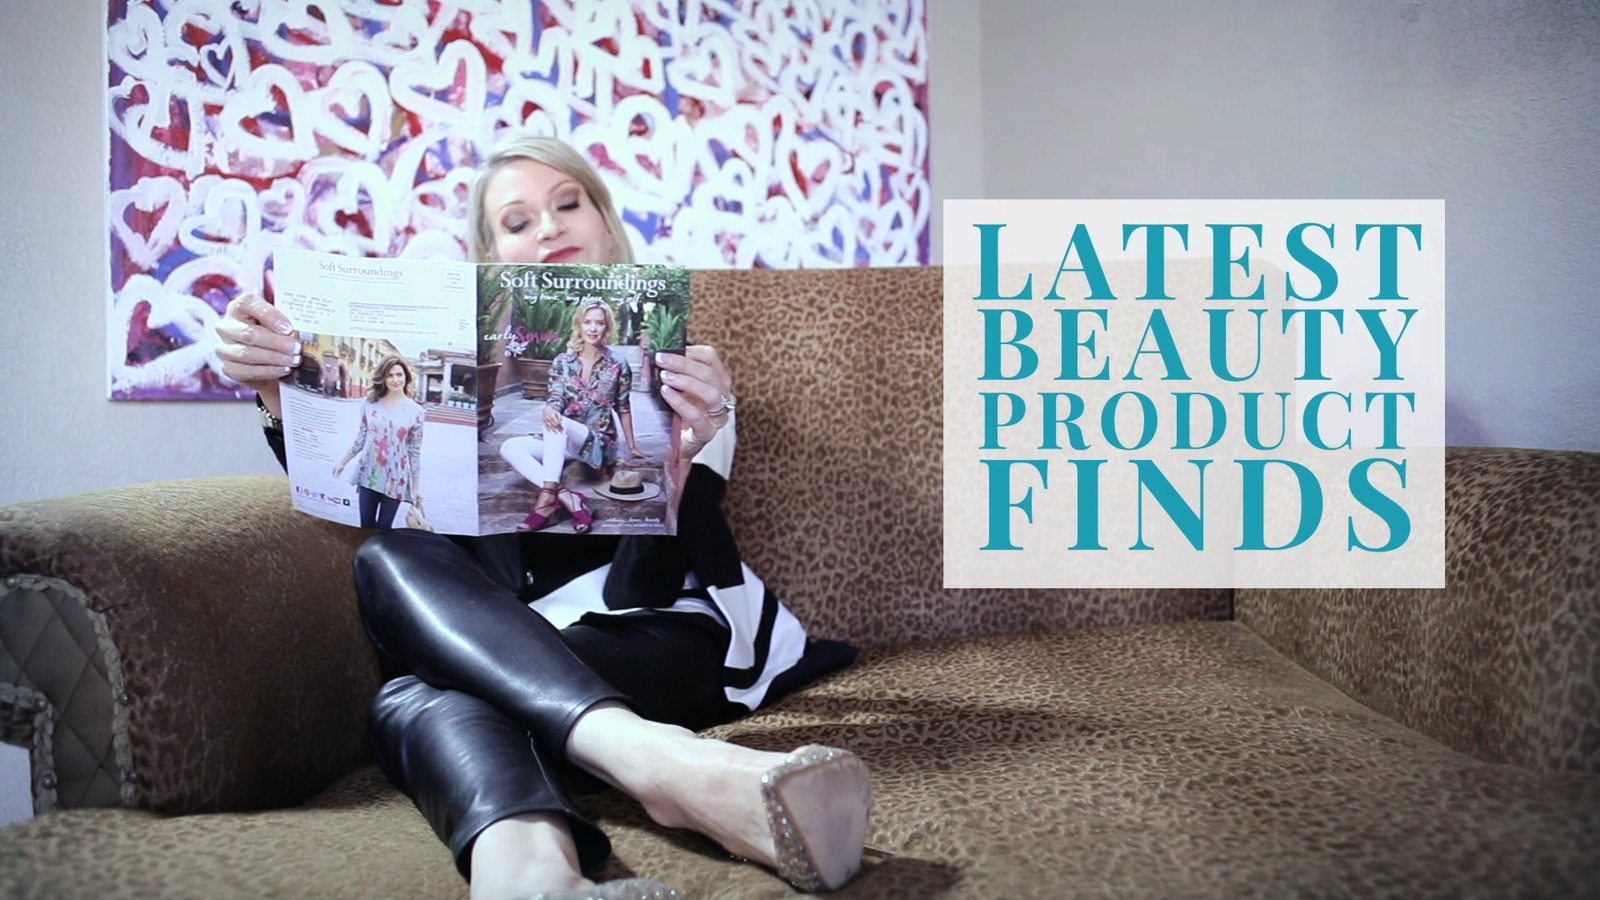 VIDEO ~ Latest Beauty Product Finds